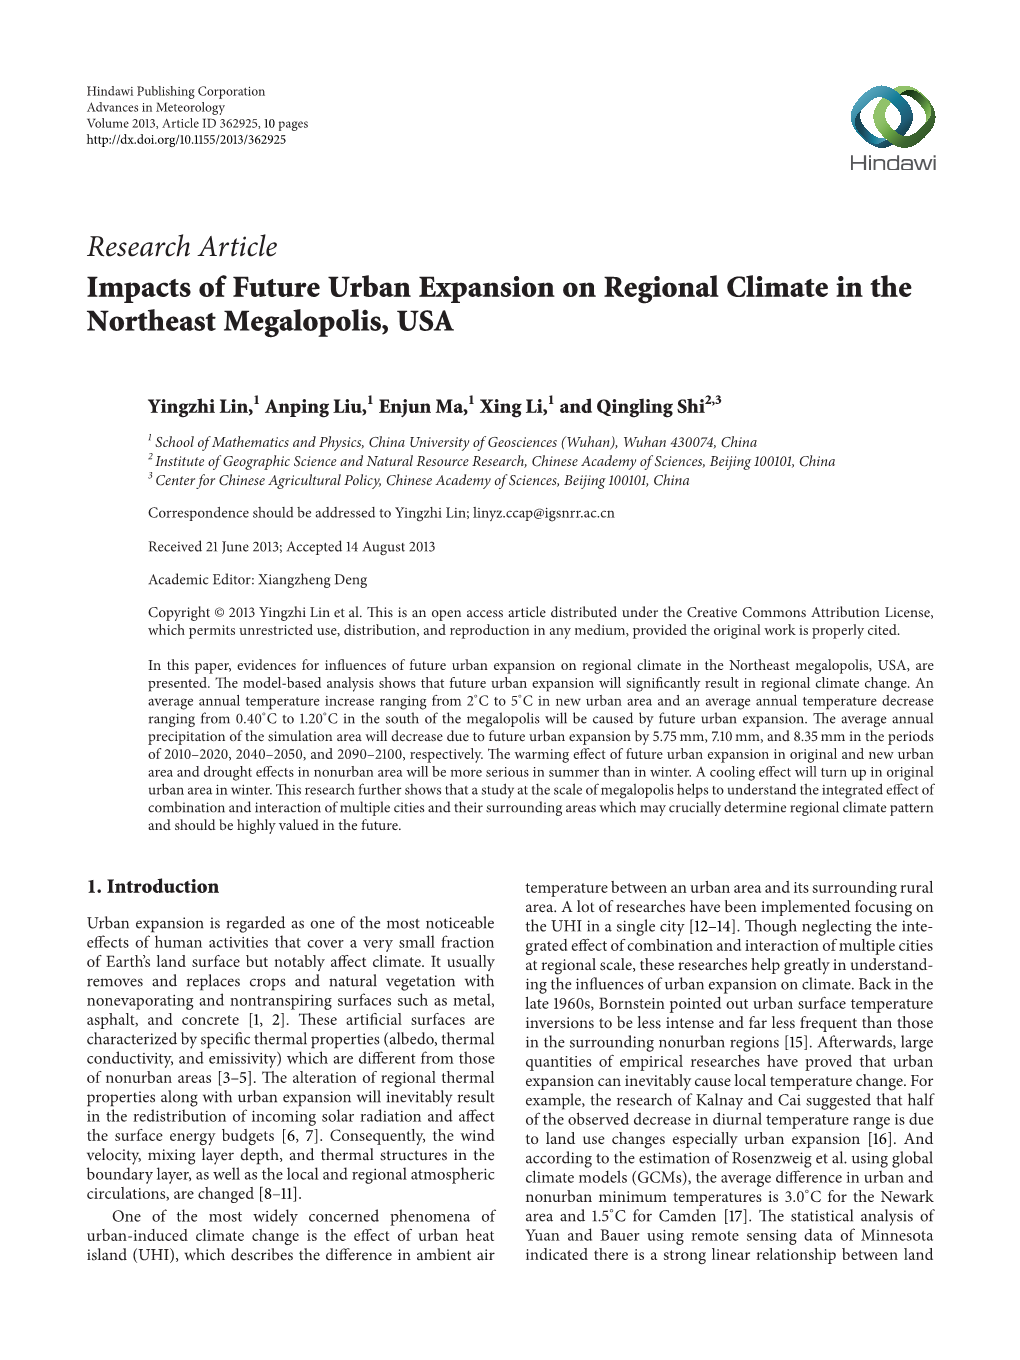 Impacts of Future Urban Expansion on Regional Climate in the Northeast Megalopolis, USA